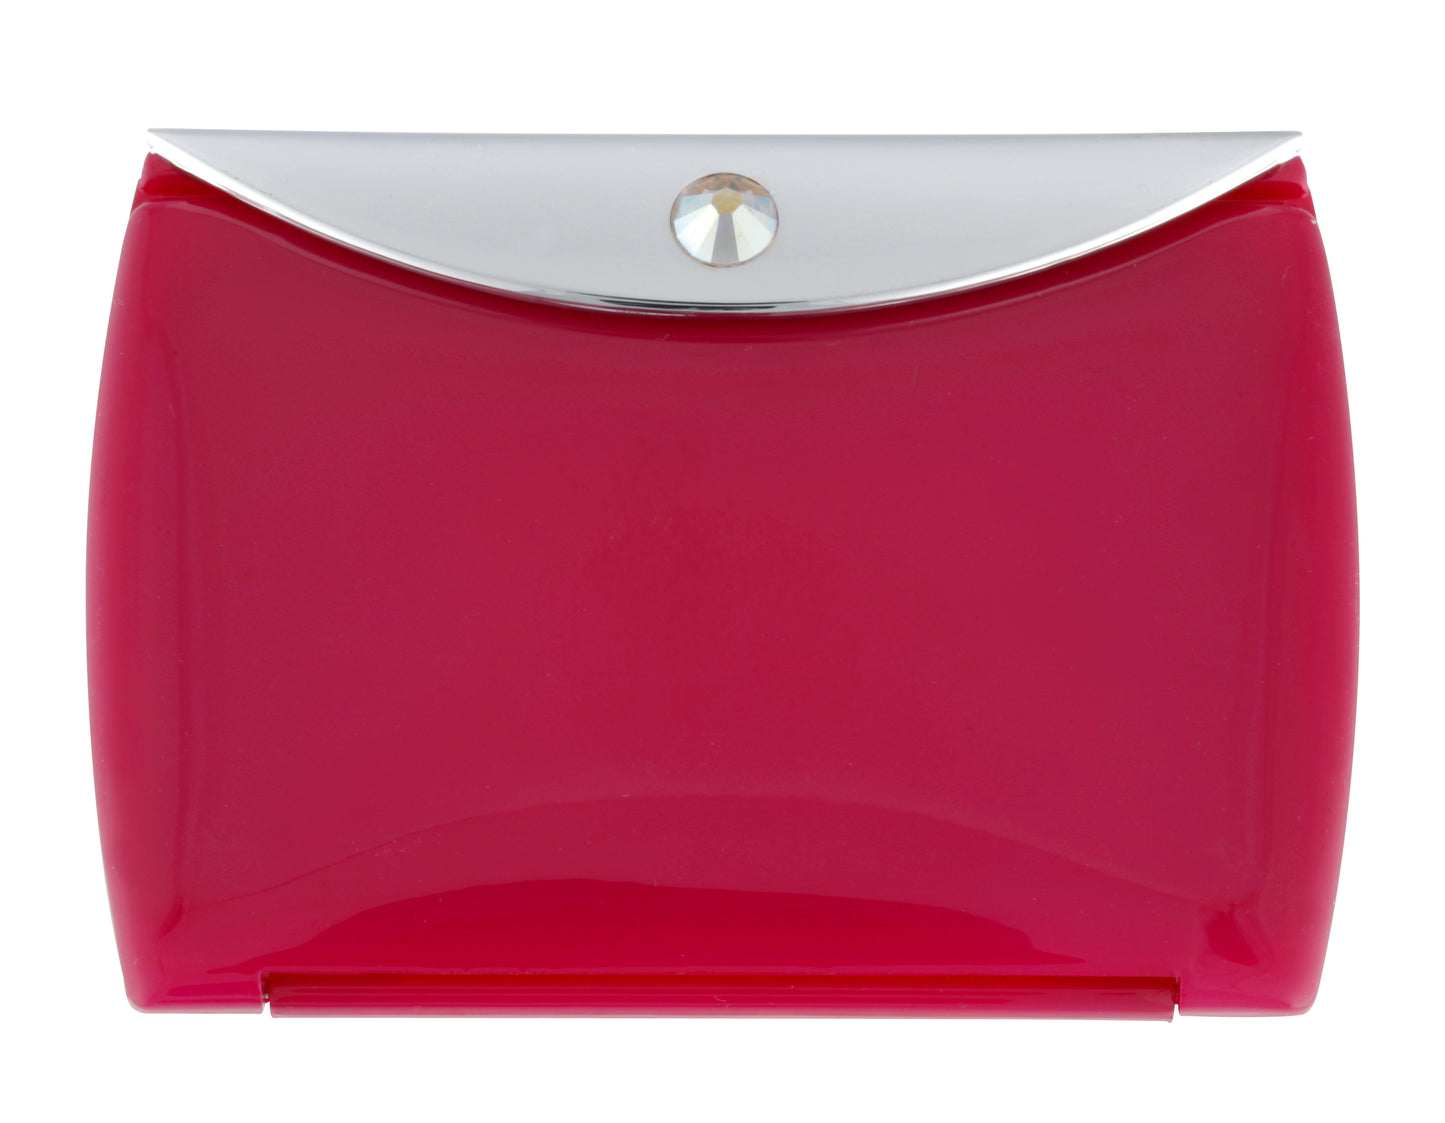 Load image into Gallery viewer, Fancy Metal Goods Pink Mirror Compact Envelope 3x Mag with Swarovski Crystal
